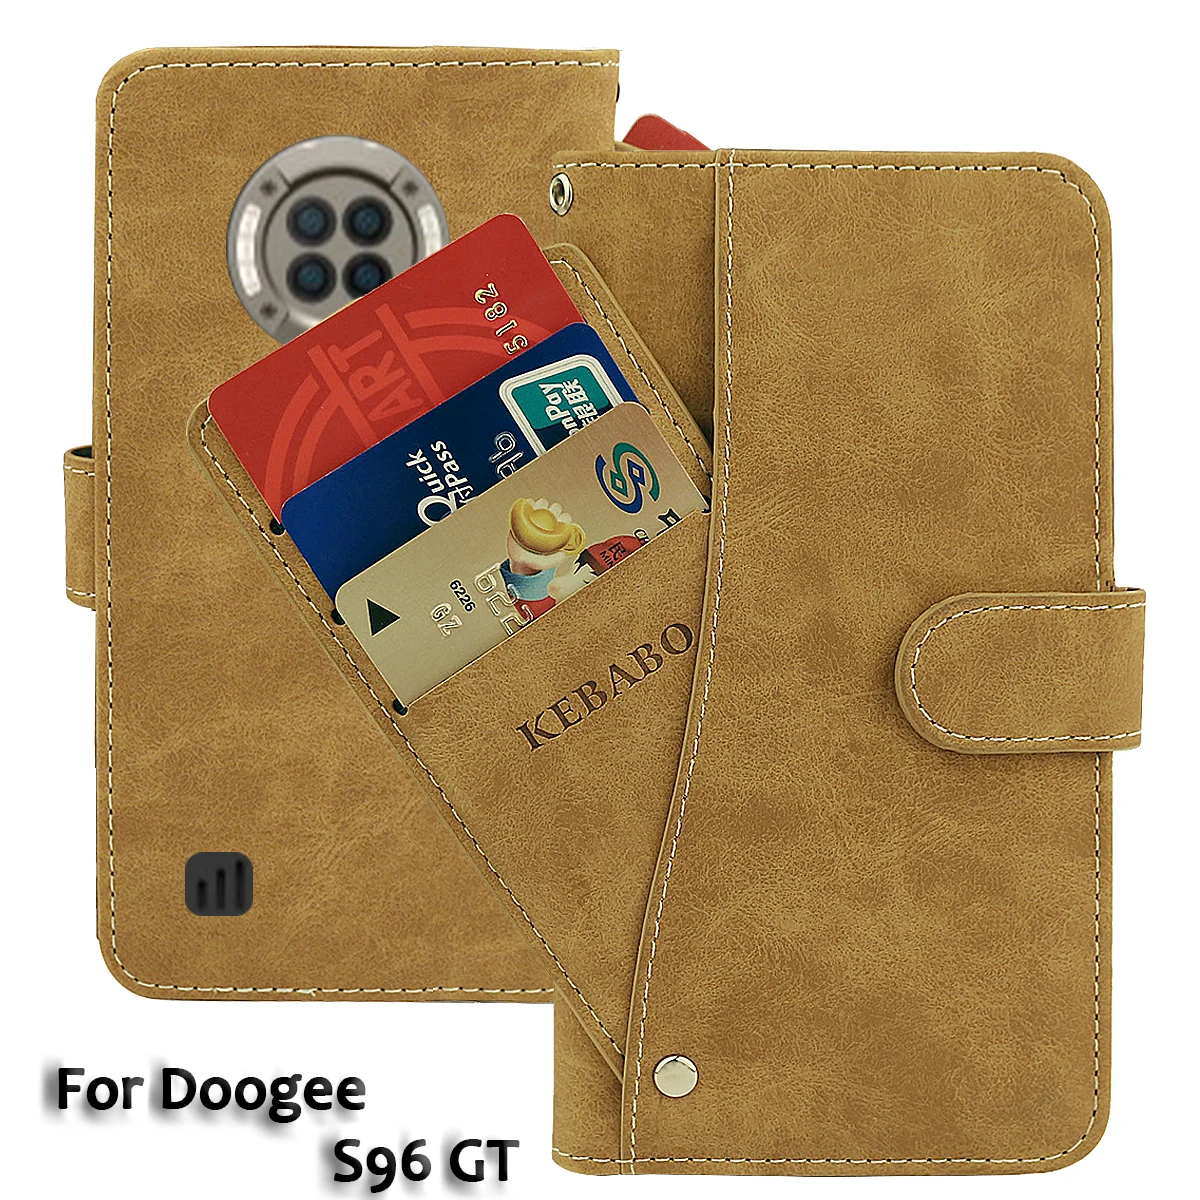 

Vintage Leather Wallet Doogee S96 GT Case 6.22" Flip Luxury Card Slots Cover Magnet Phone Protective Cases Bags